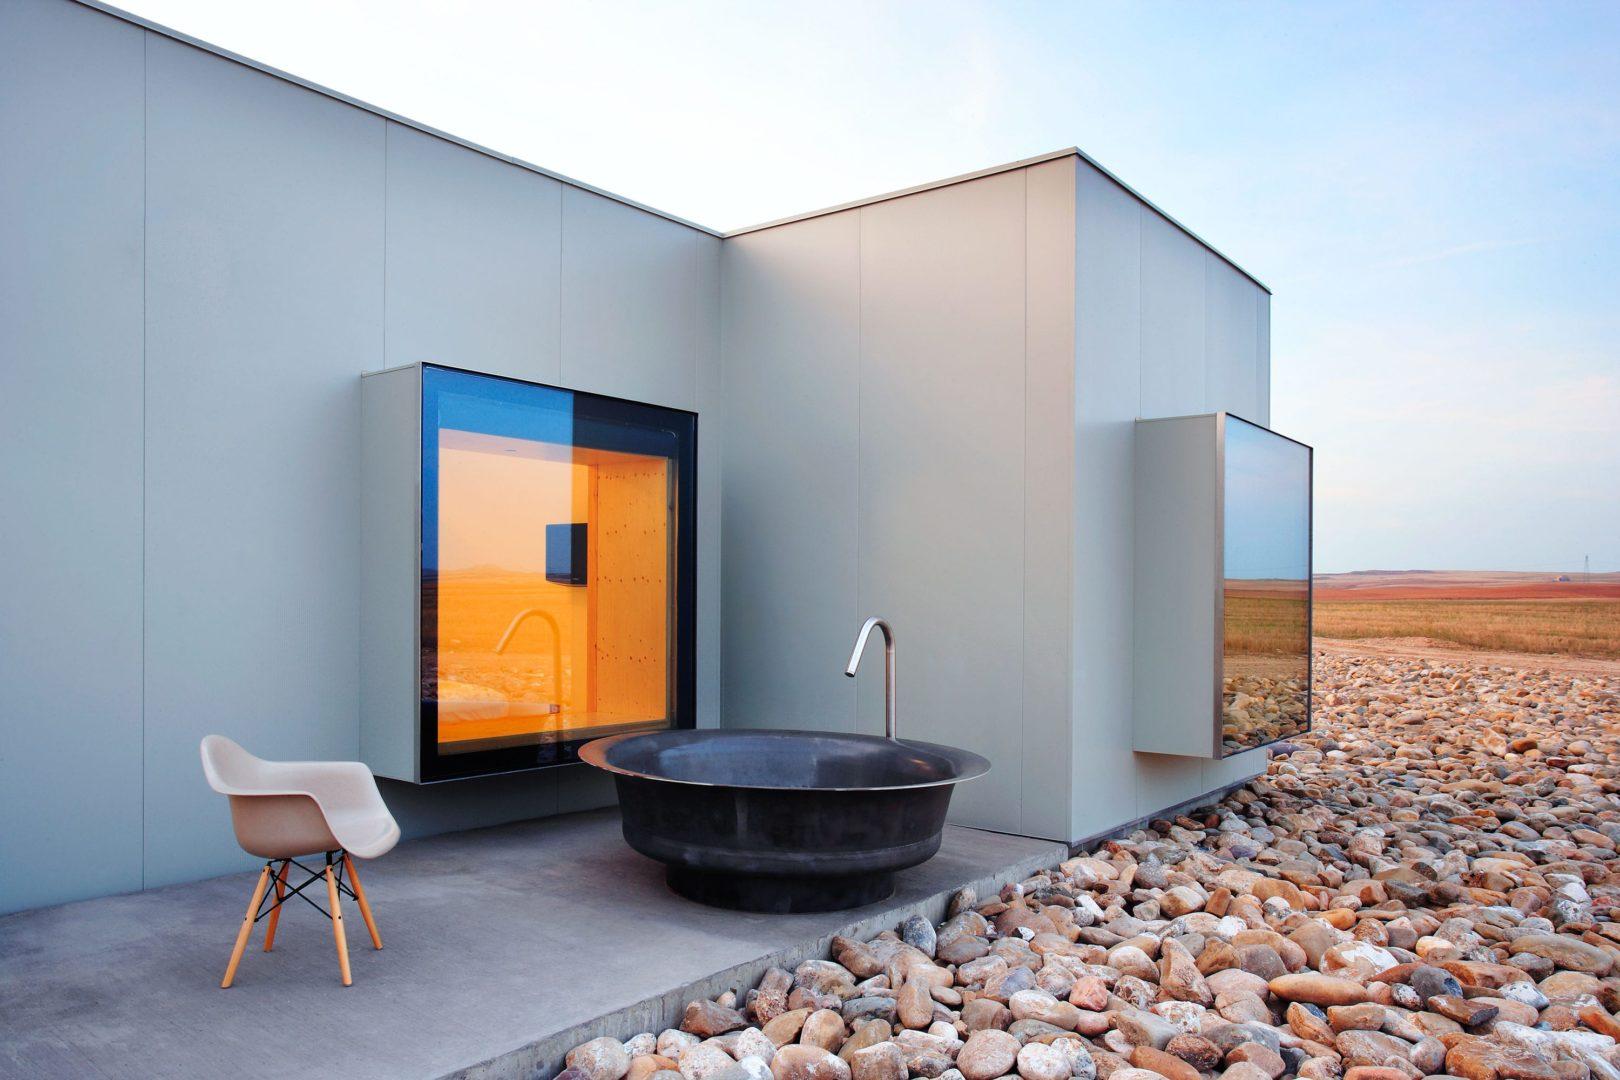 5 Stunning Bathrooms With a View Around The World